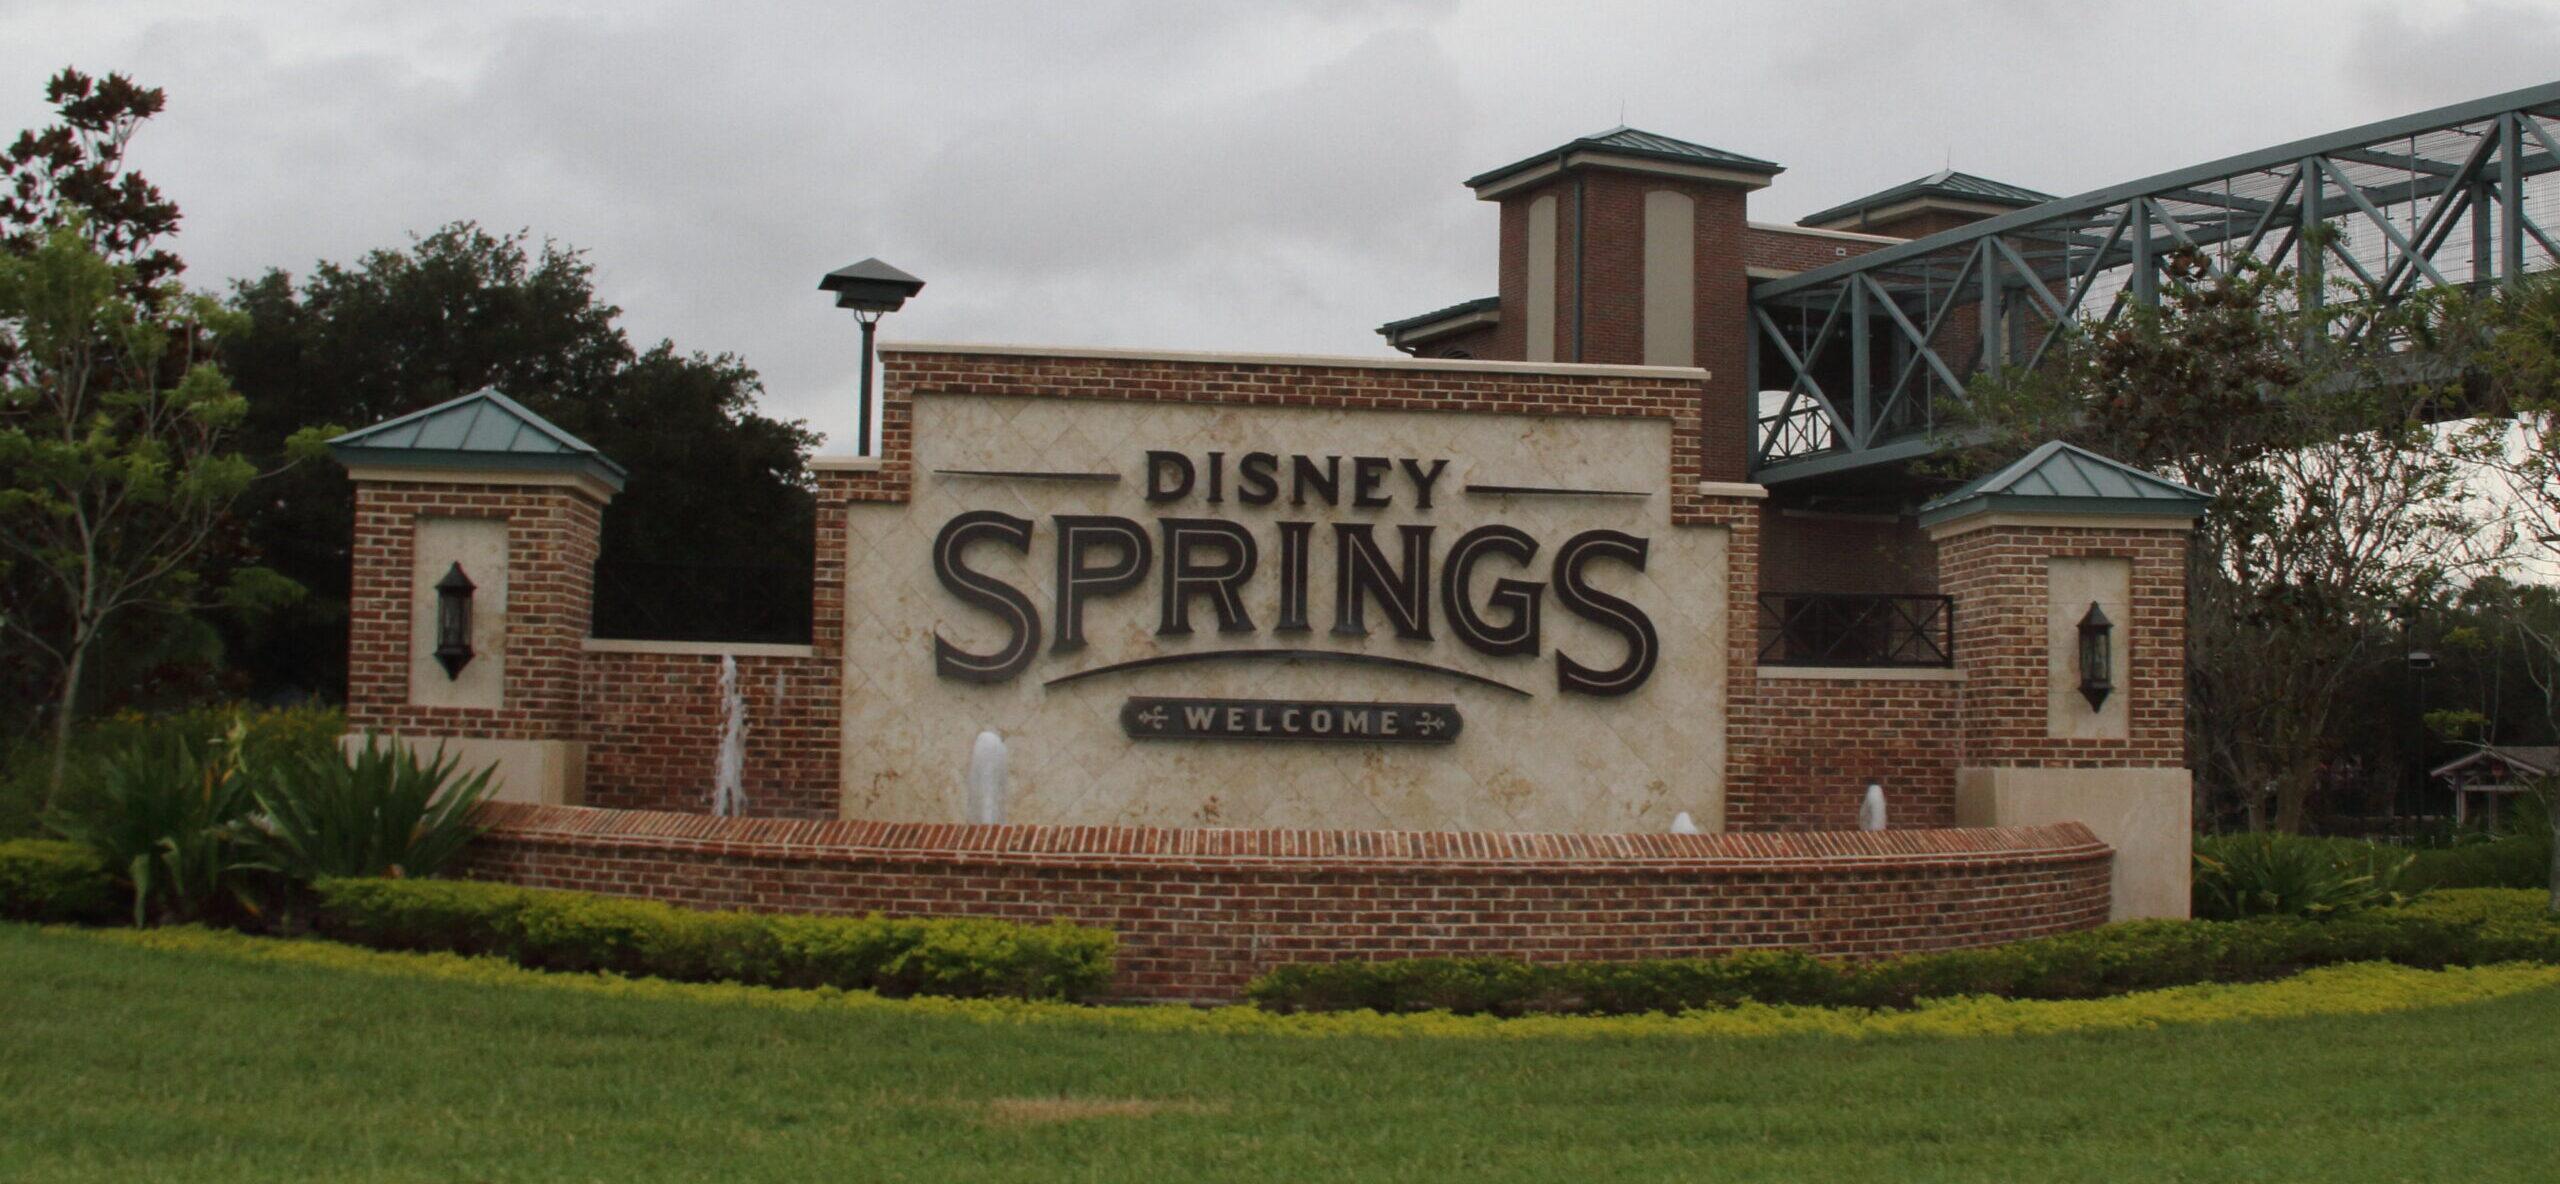 Man Arrested At Disney World After Getting Drunk And Yelling At Children